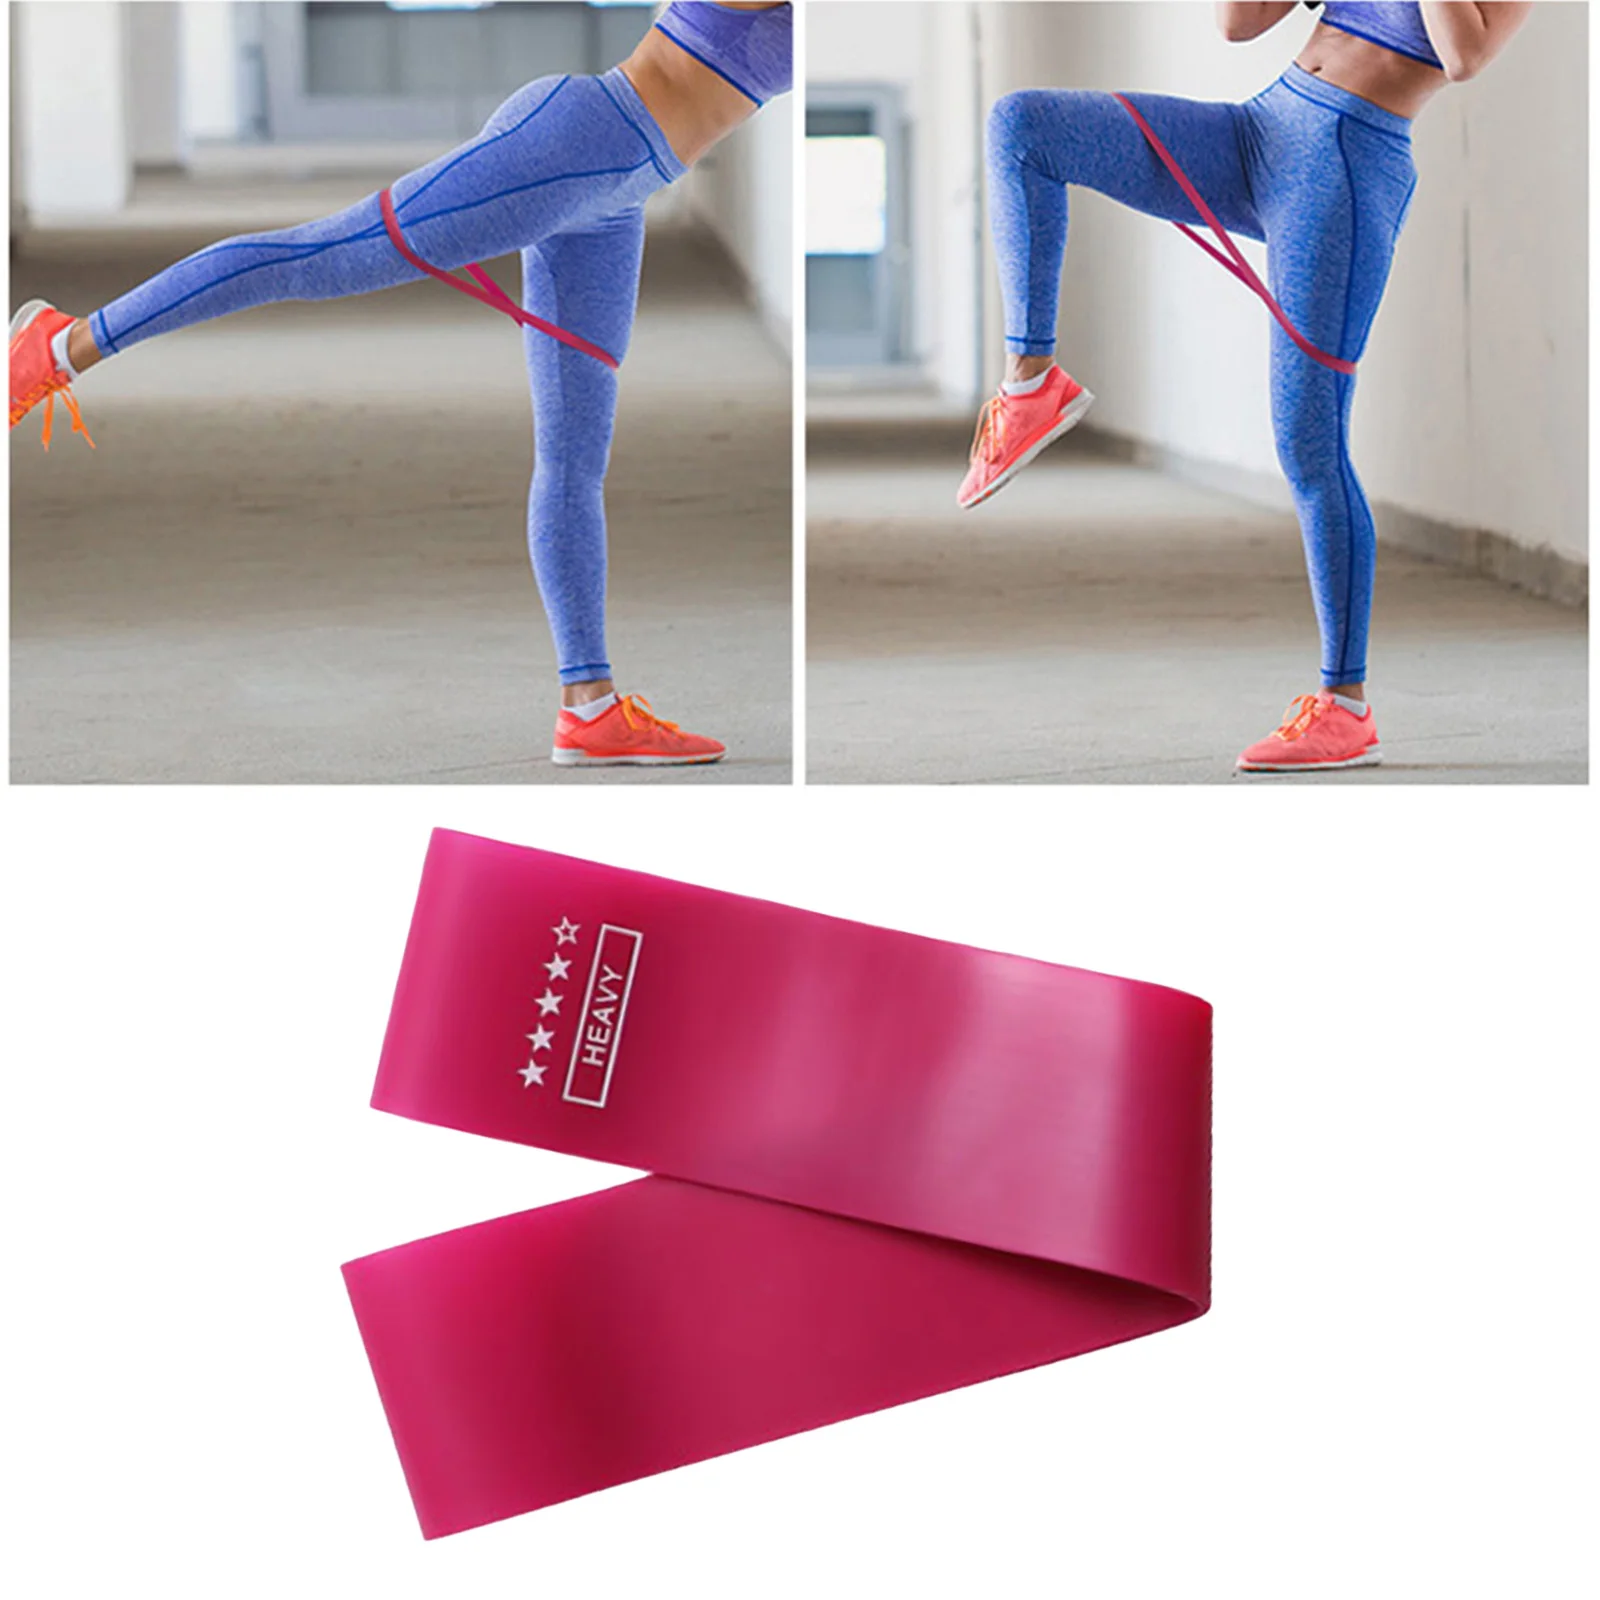 Sports Training Gym Non Slip Resistance Band 5 level for Legs and Butt 5-40lb